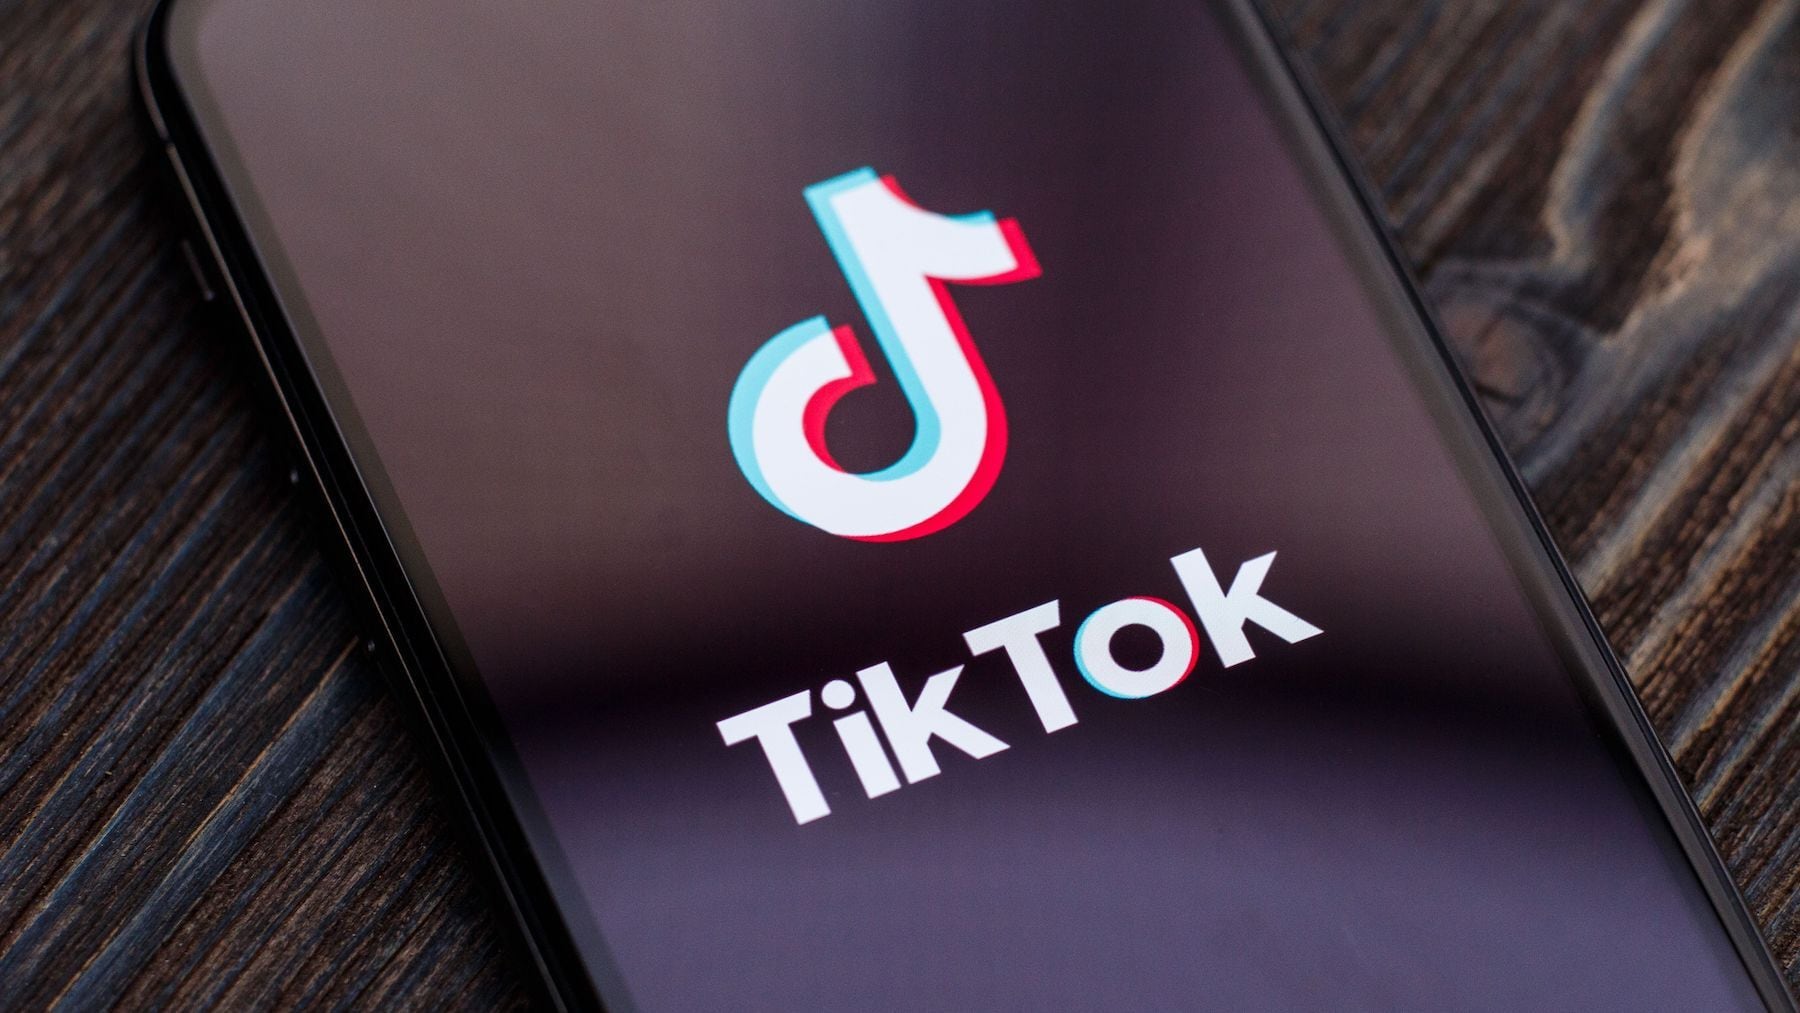 TikTok Divest-or-Ban Bill Heads to Fast Track in US Congress